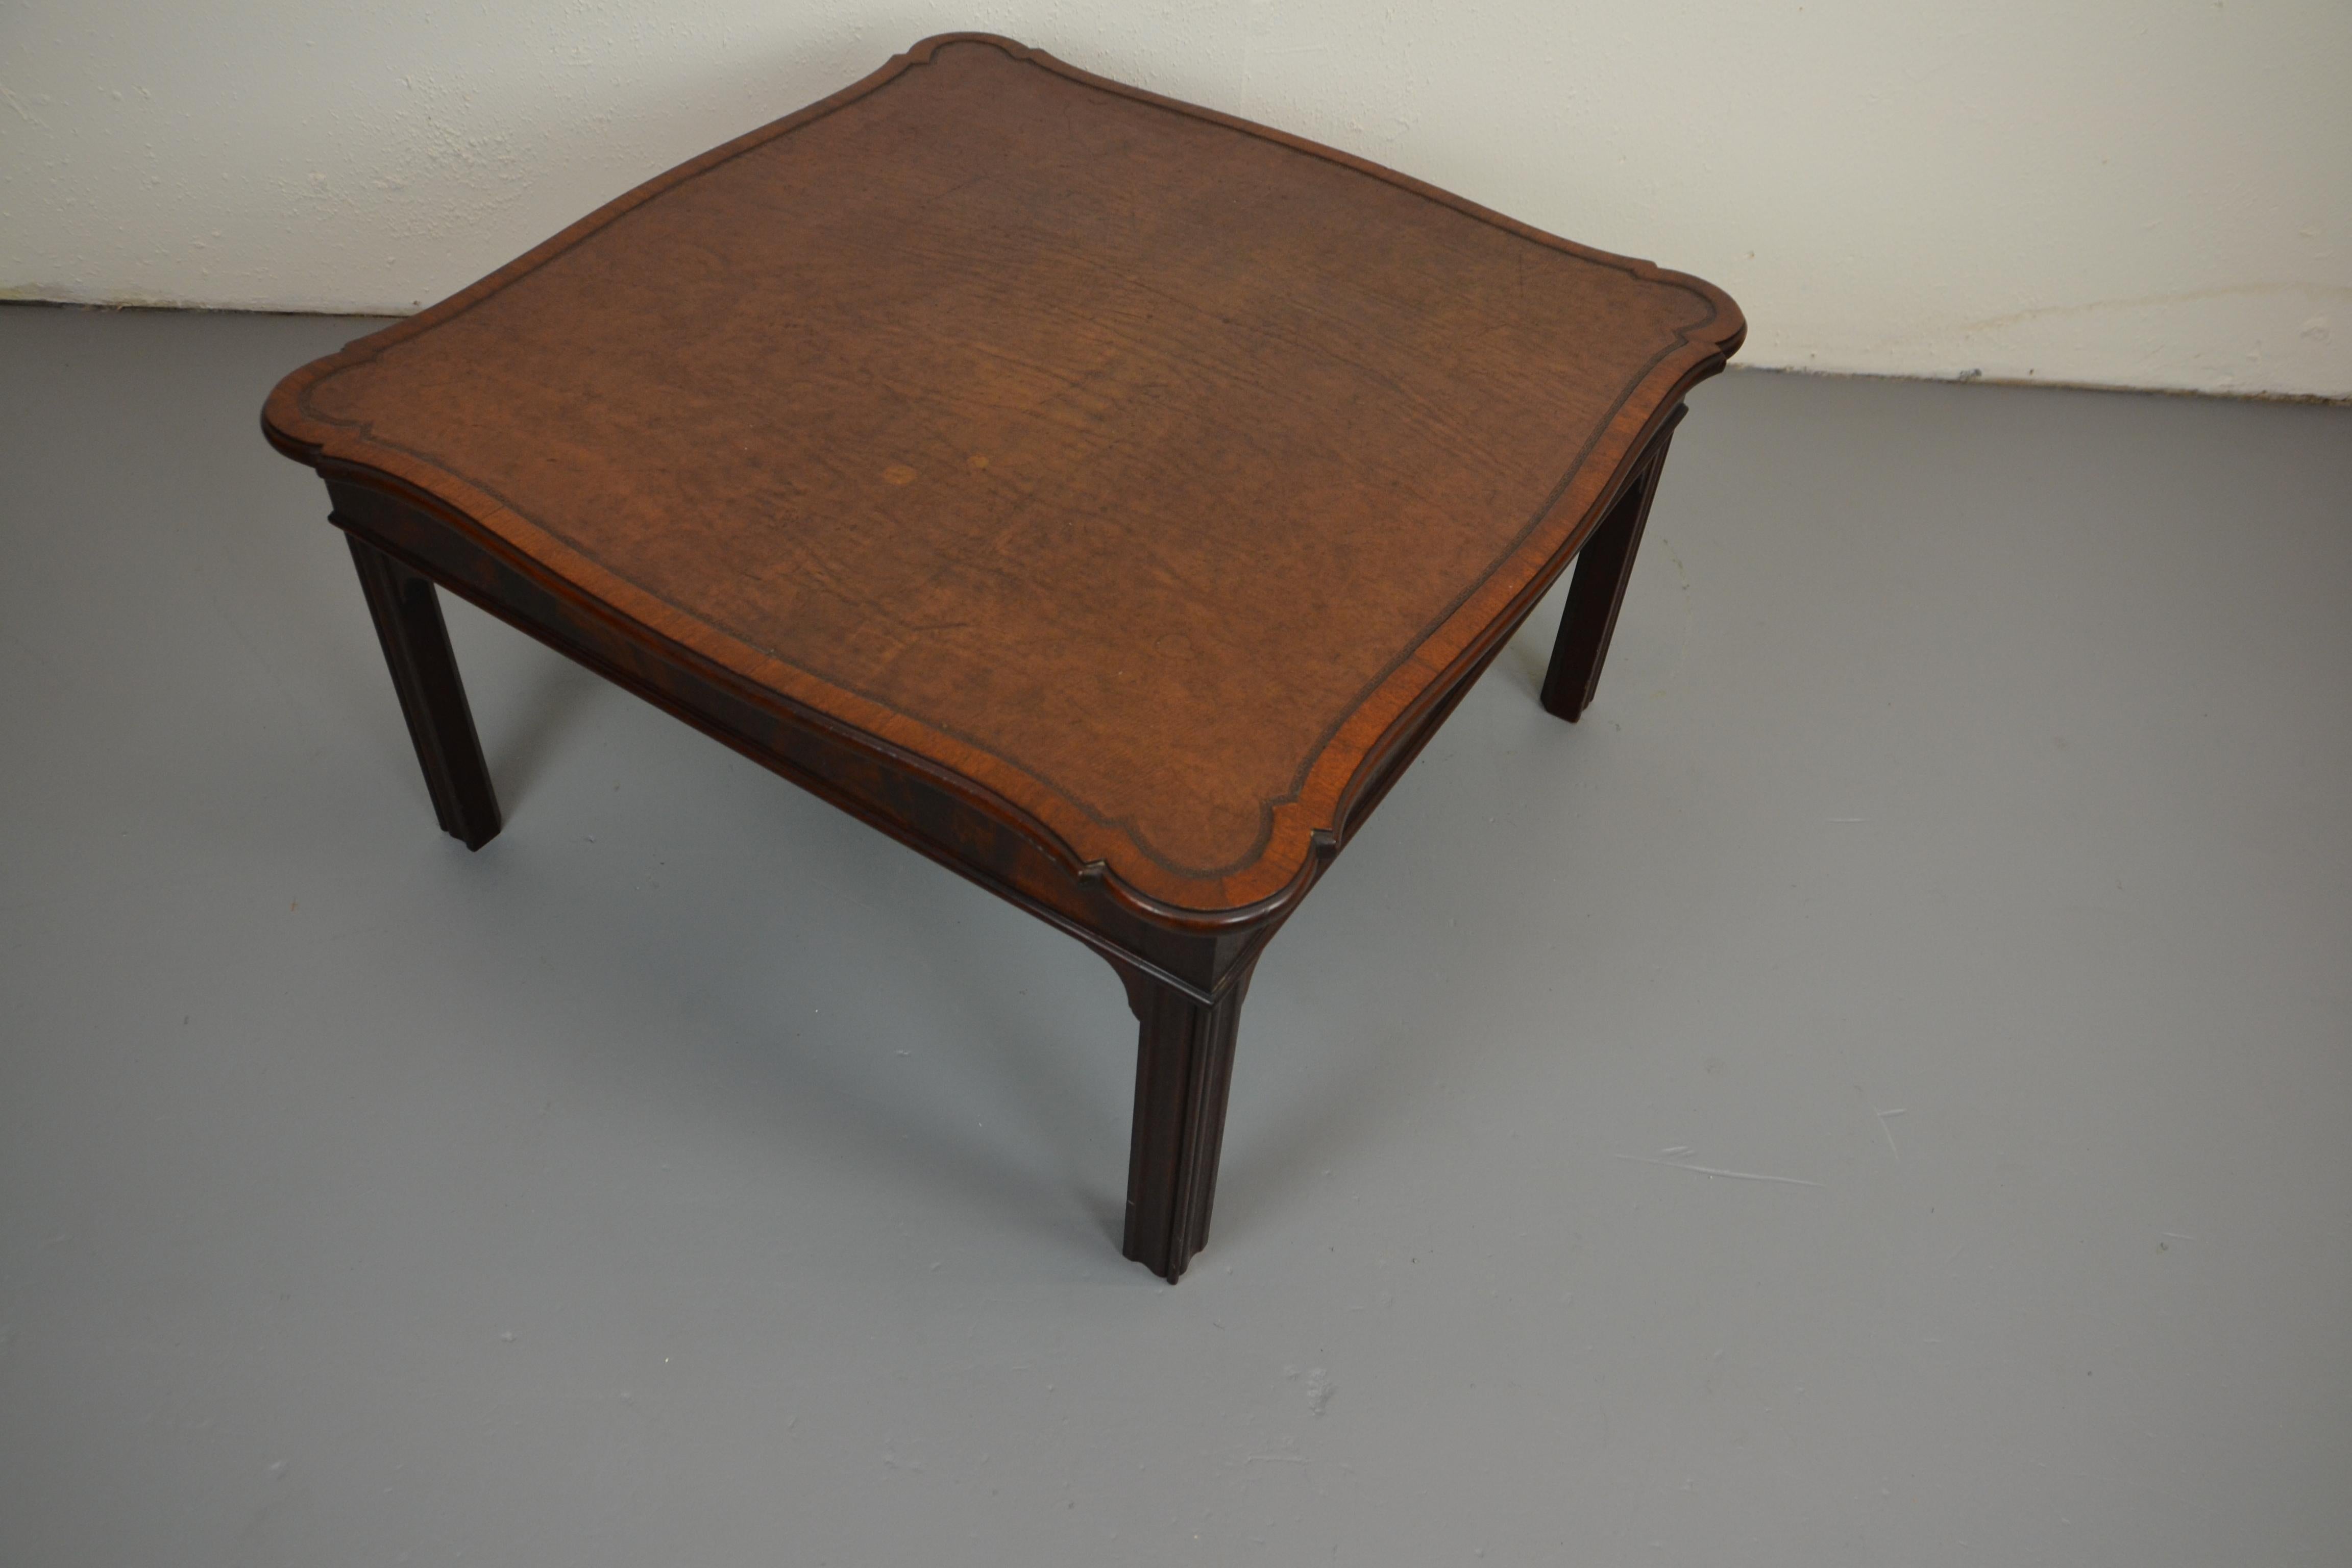 Mid-20th Century English Leather Top Coffee Table For Sale